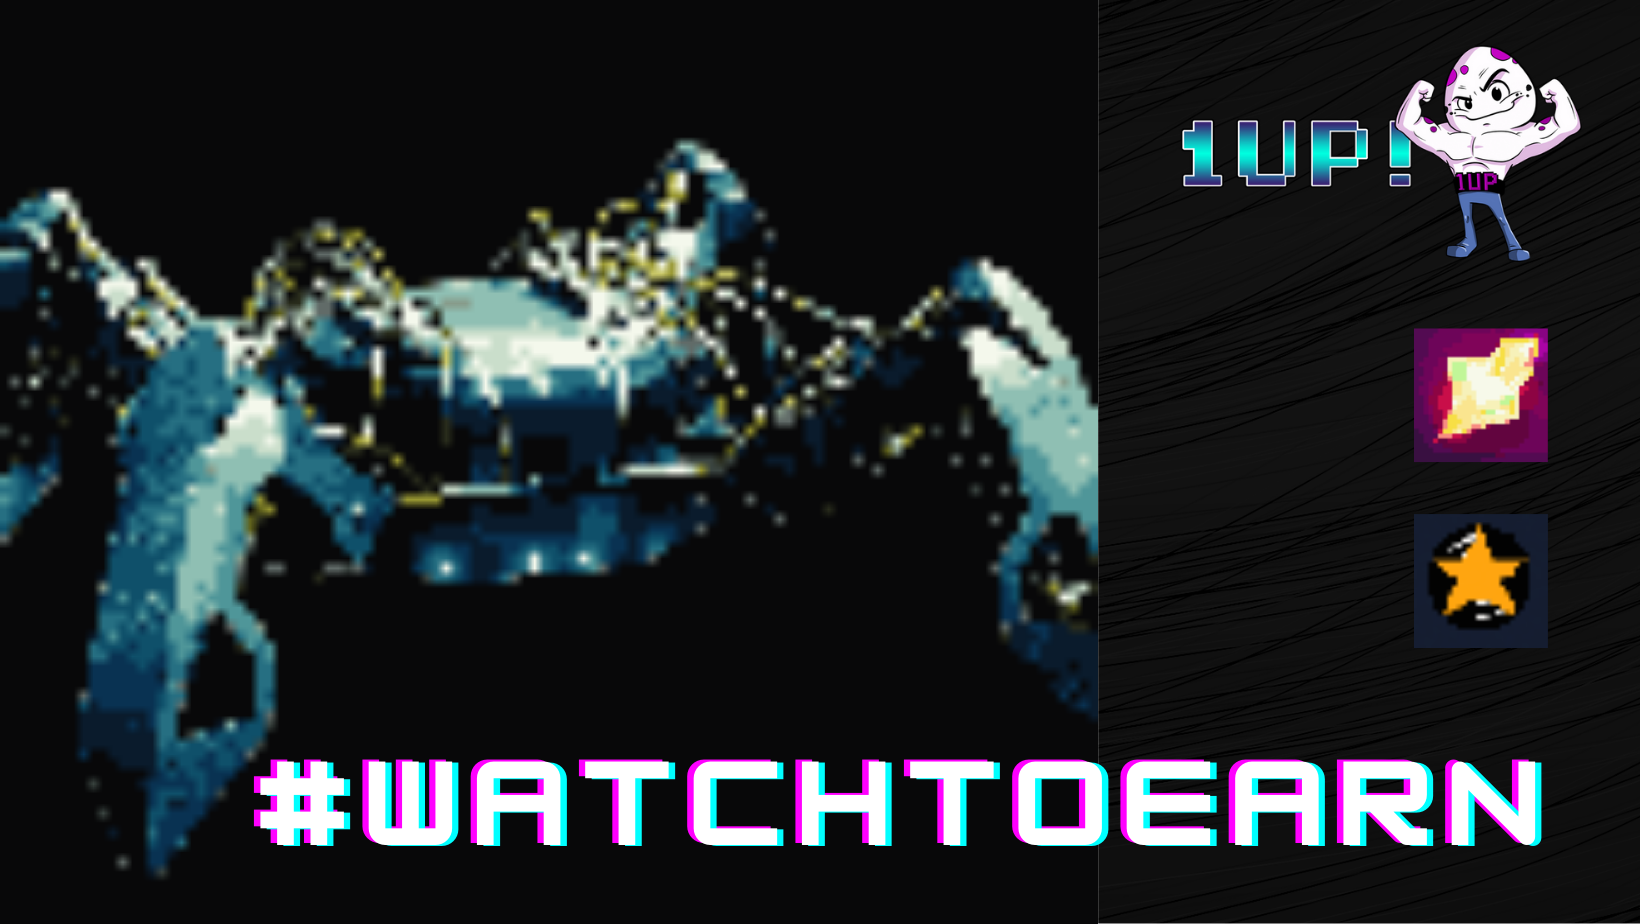 watchtoearn.png